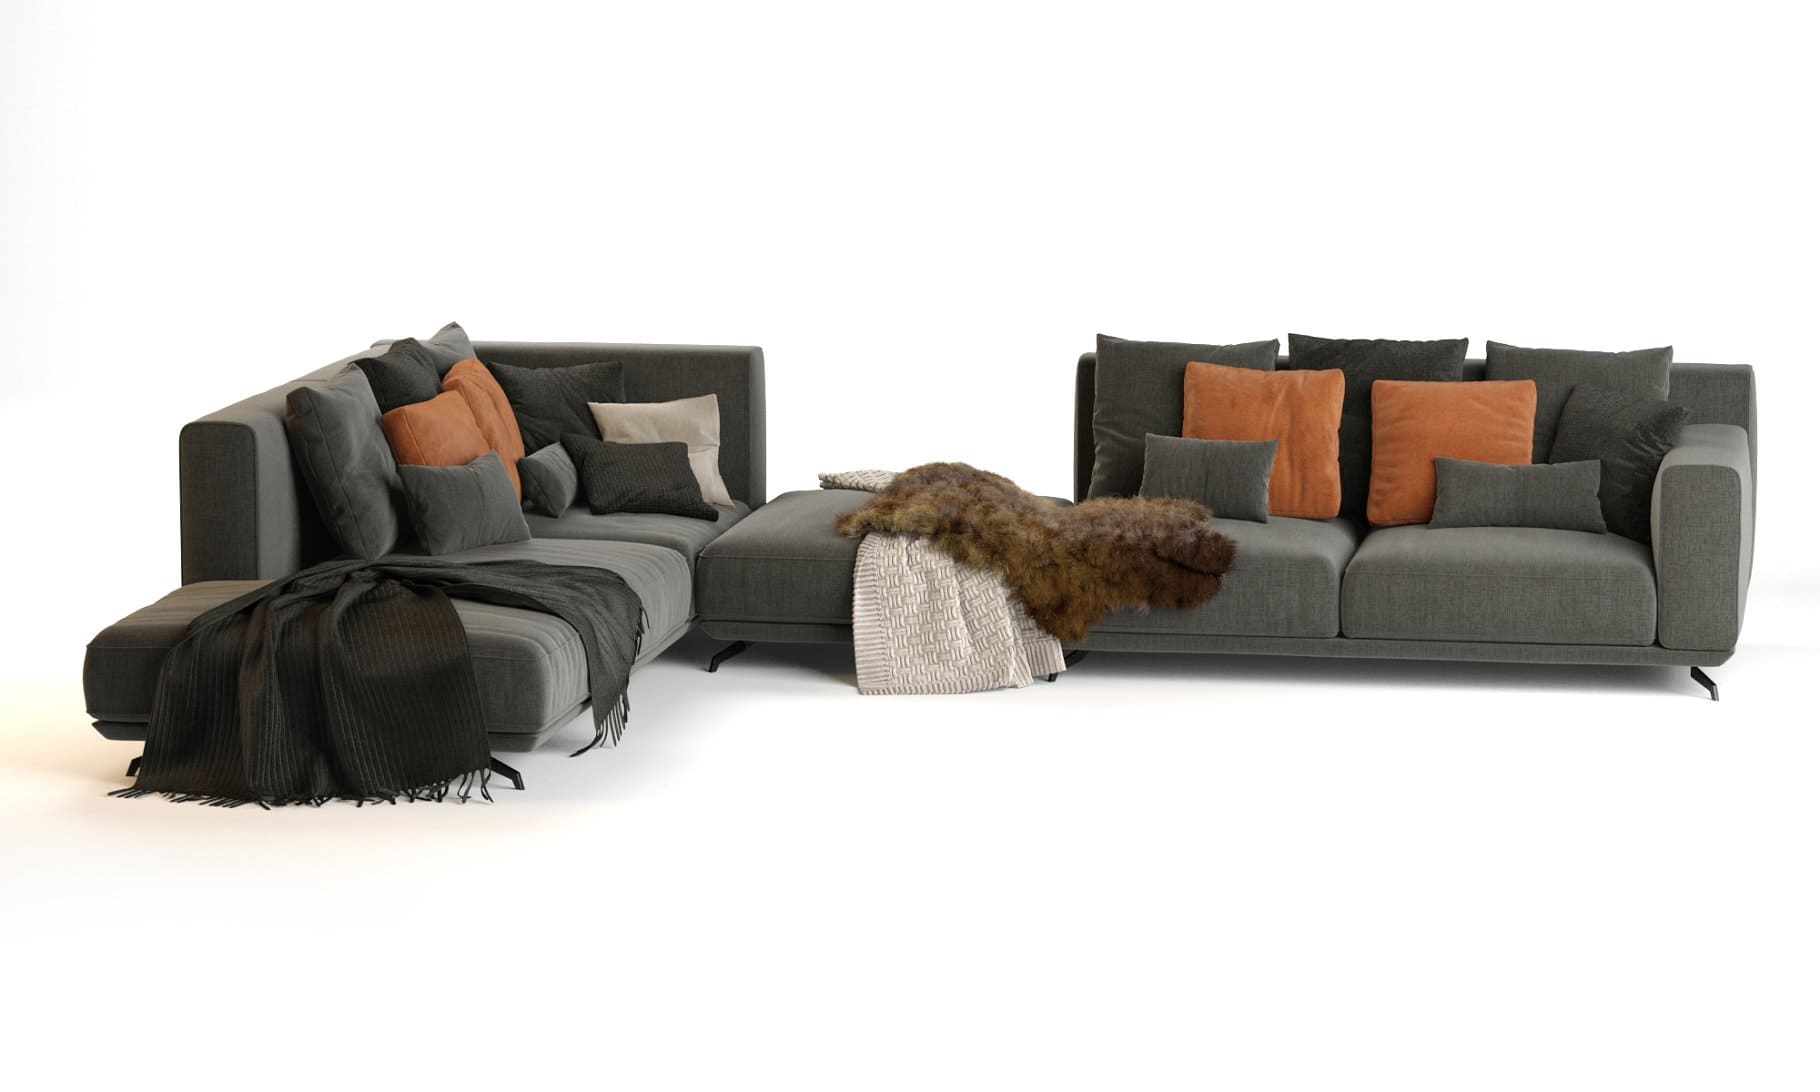 Pillows and blankets are laid out on the Dalton Sofa by Ditre Italia.